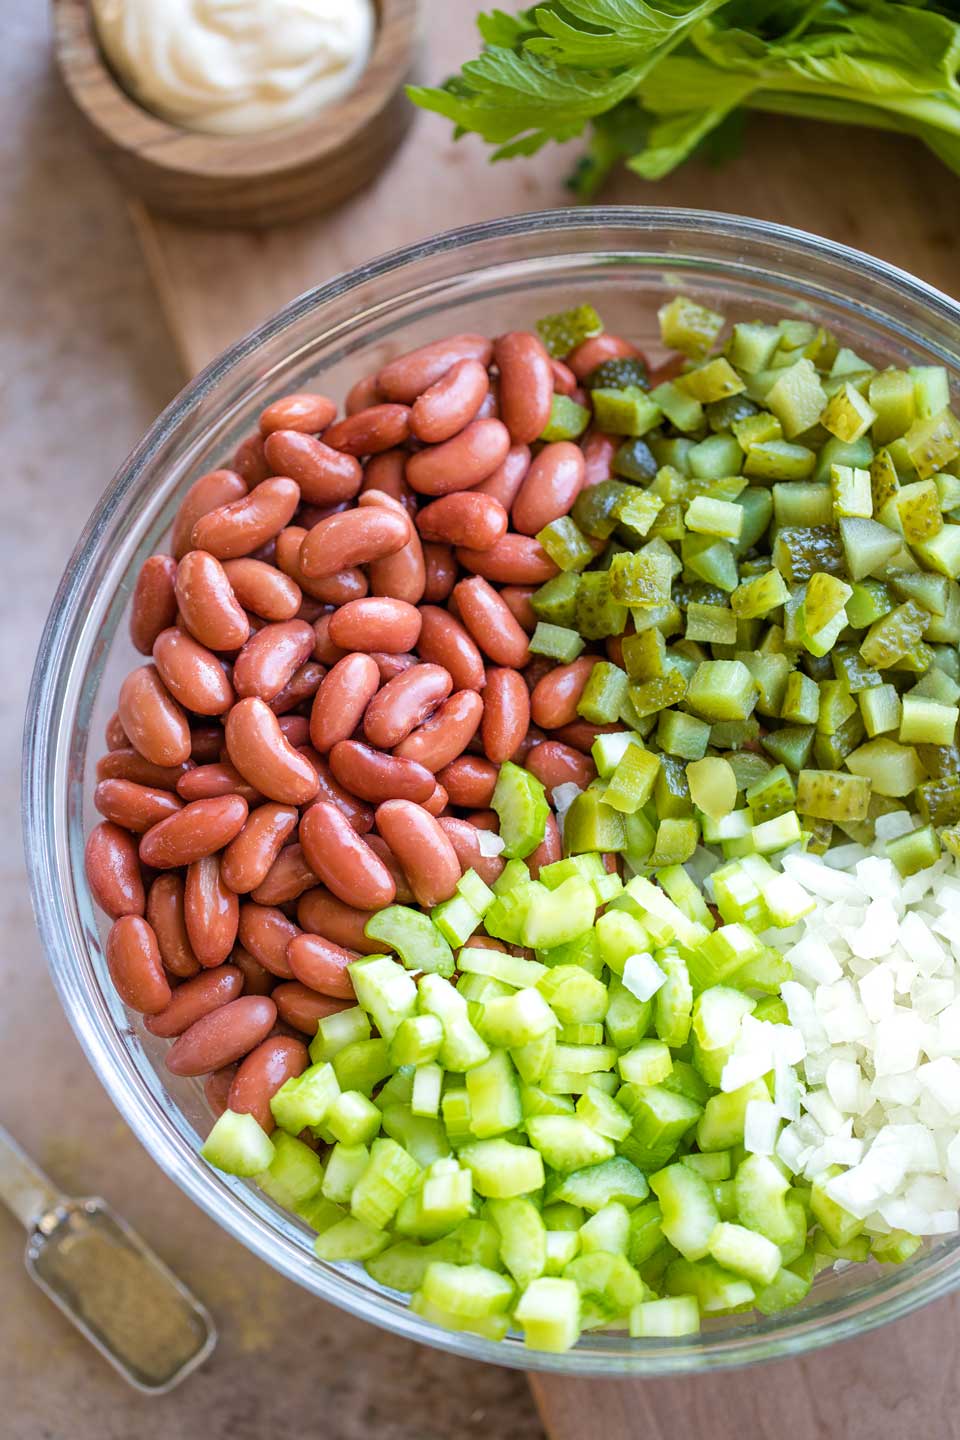 Overhead of a clear glass mixing bowl with sections of chopped celery, onion, pickles and kidney beans, ready to be mixed together.